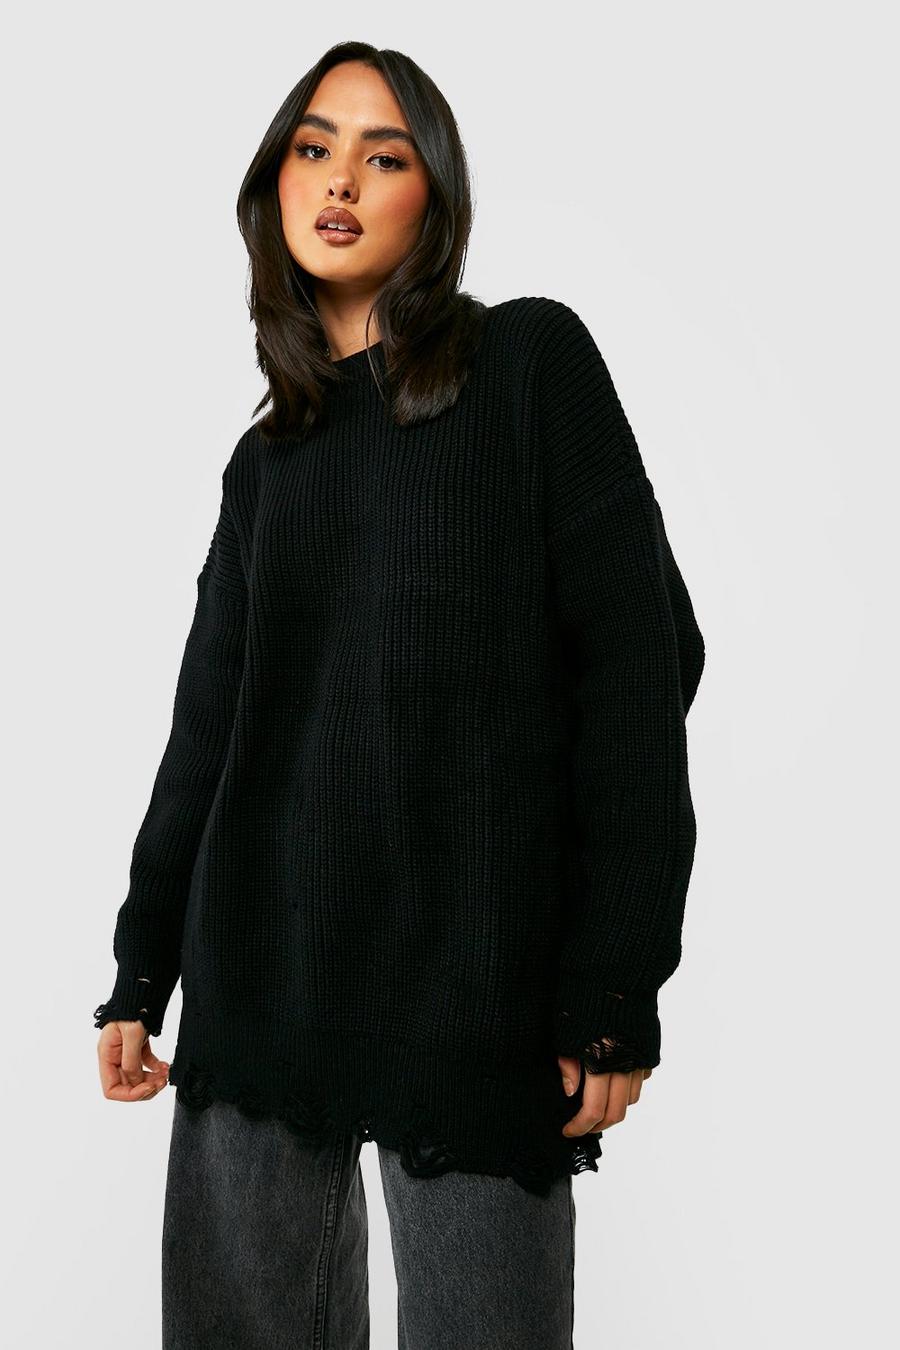 Black Oversized Knitted Sweater